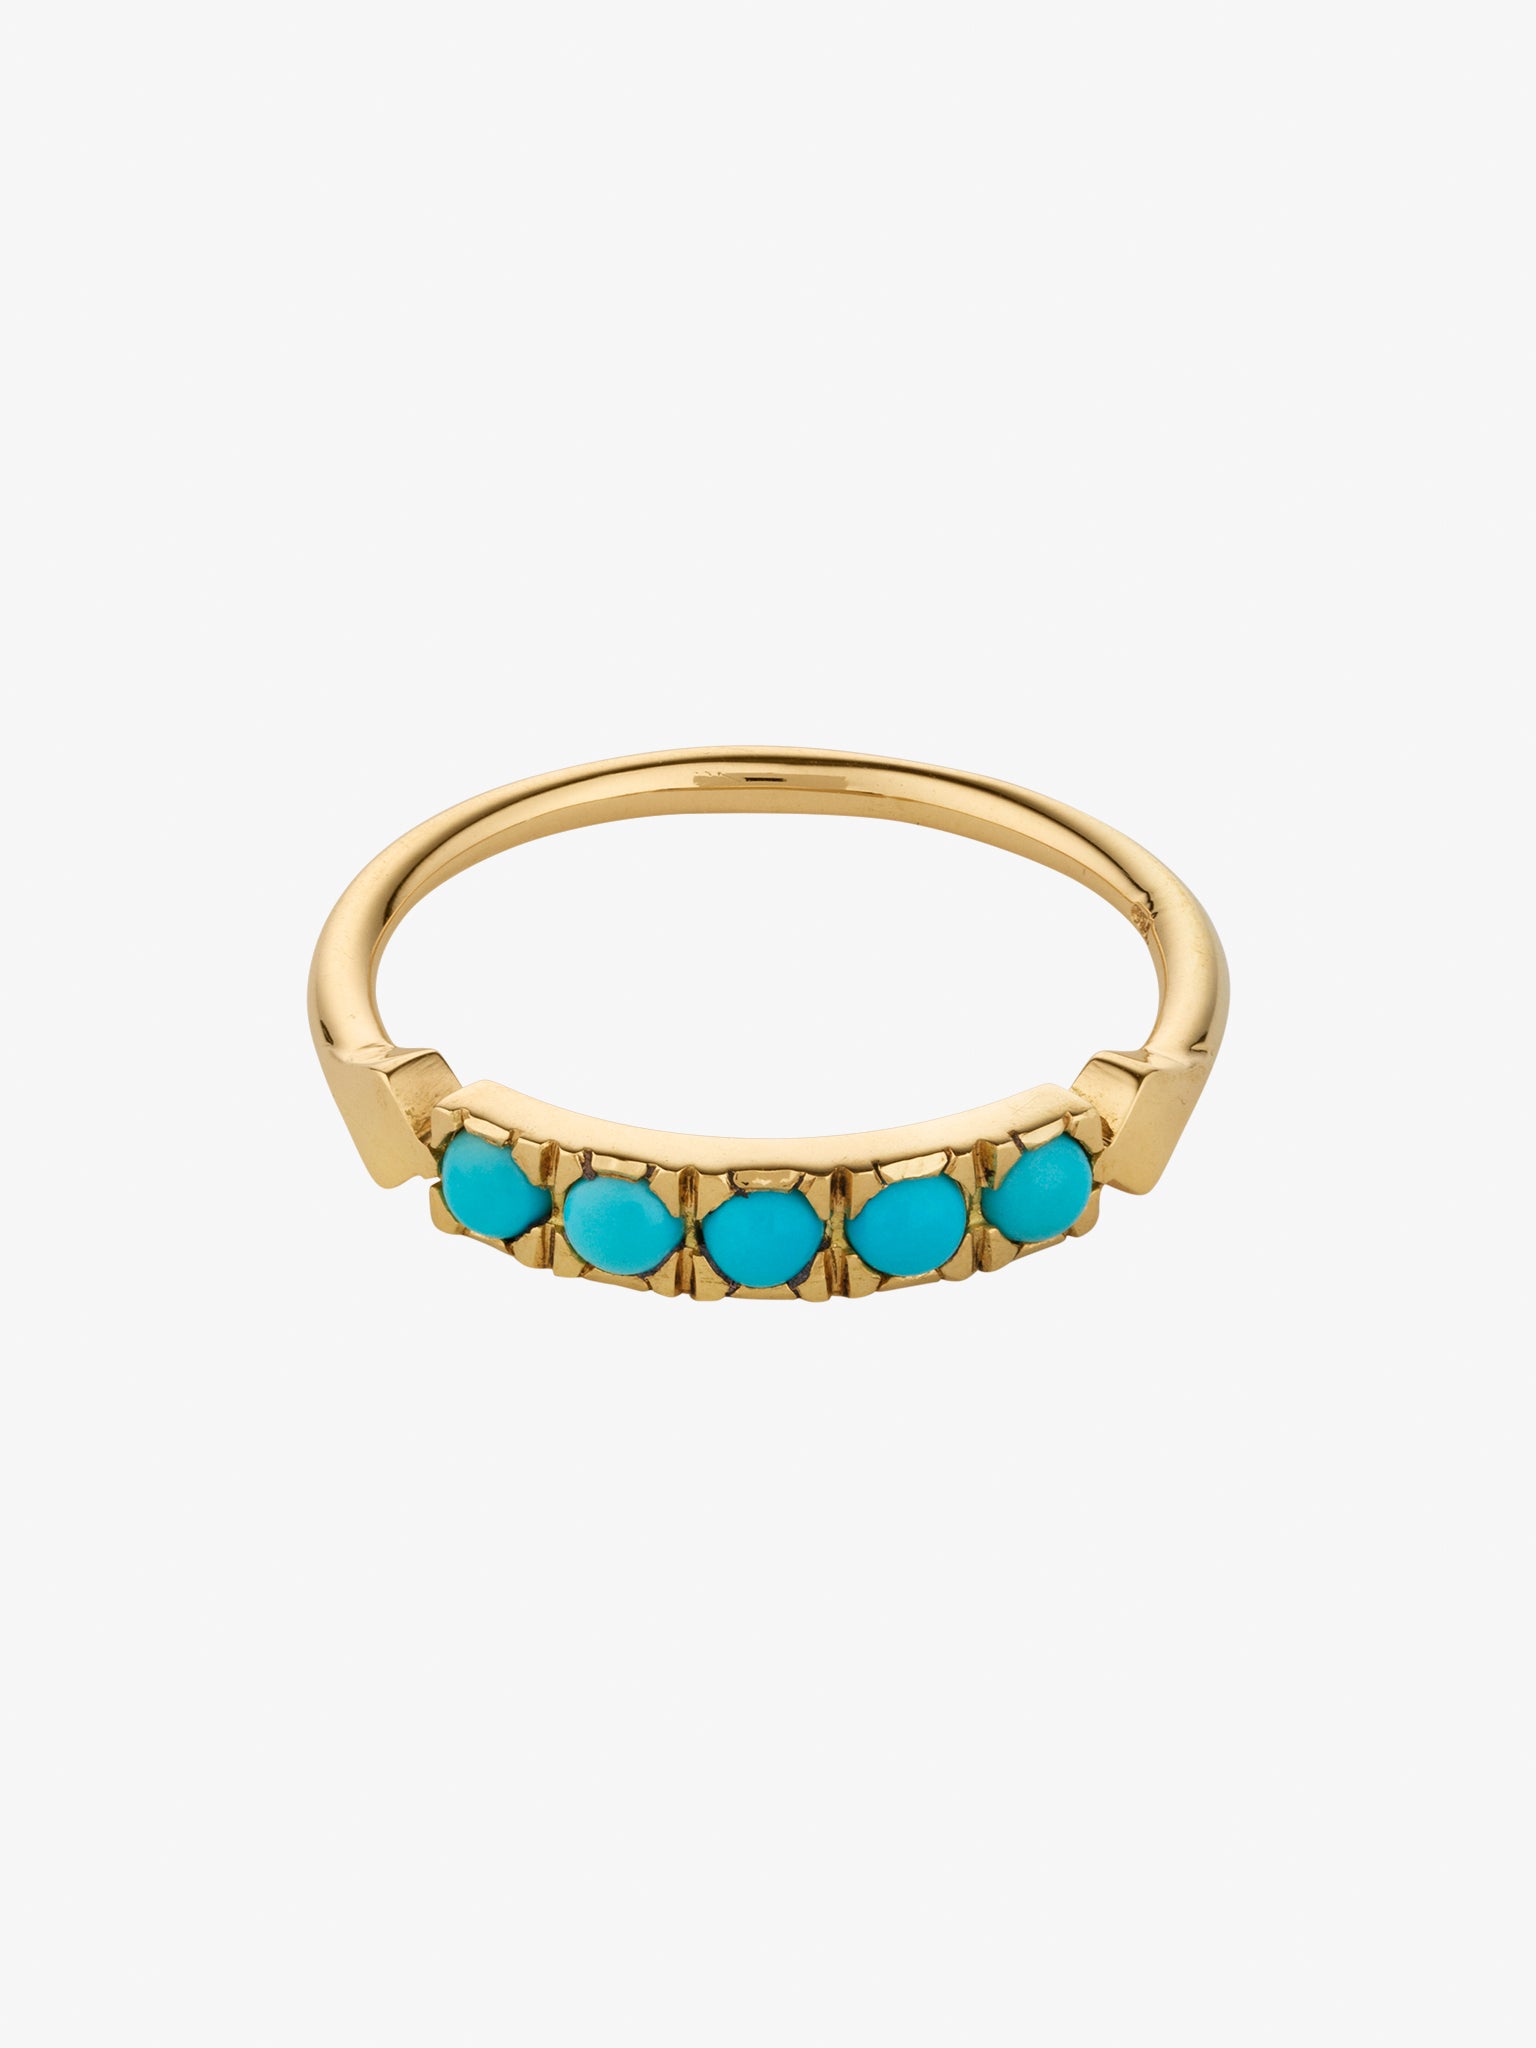 Turquoise dome ring